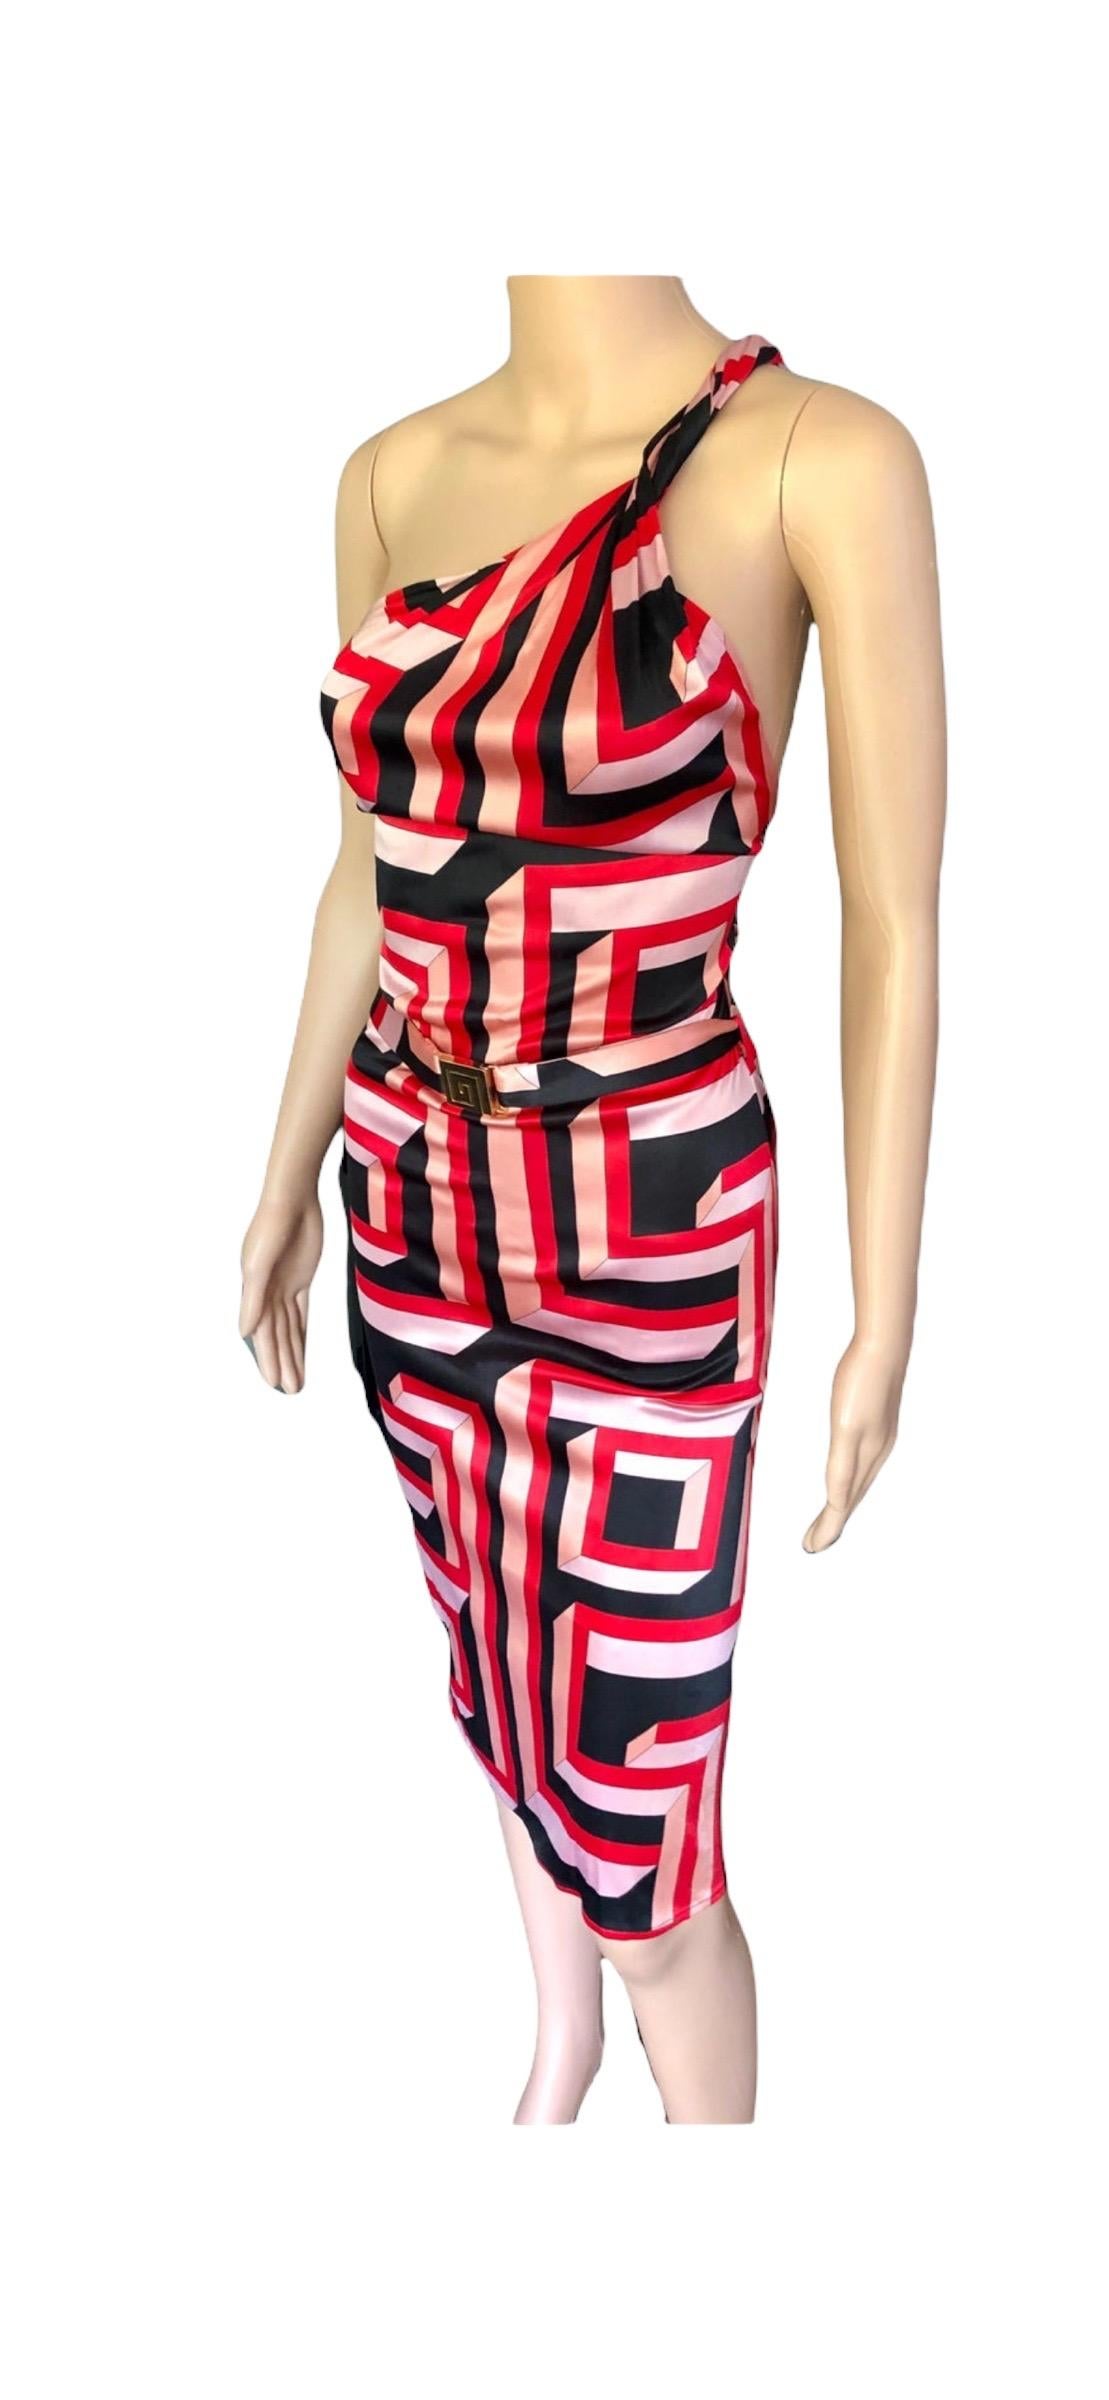 Gianni Versace S/S 2001 Vintage Geometric Print Belted Open Back Dress For Sale 10